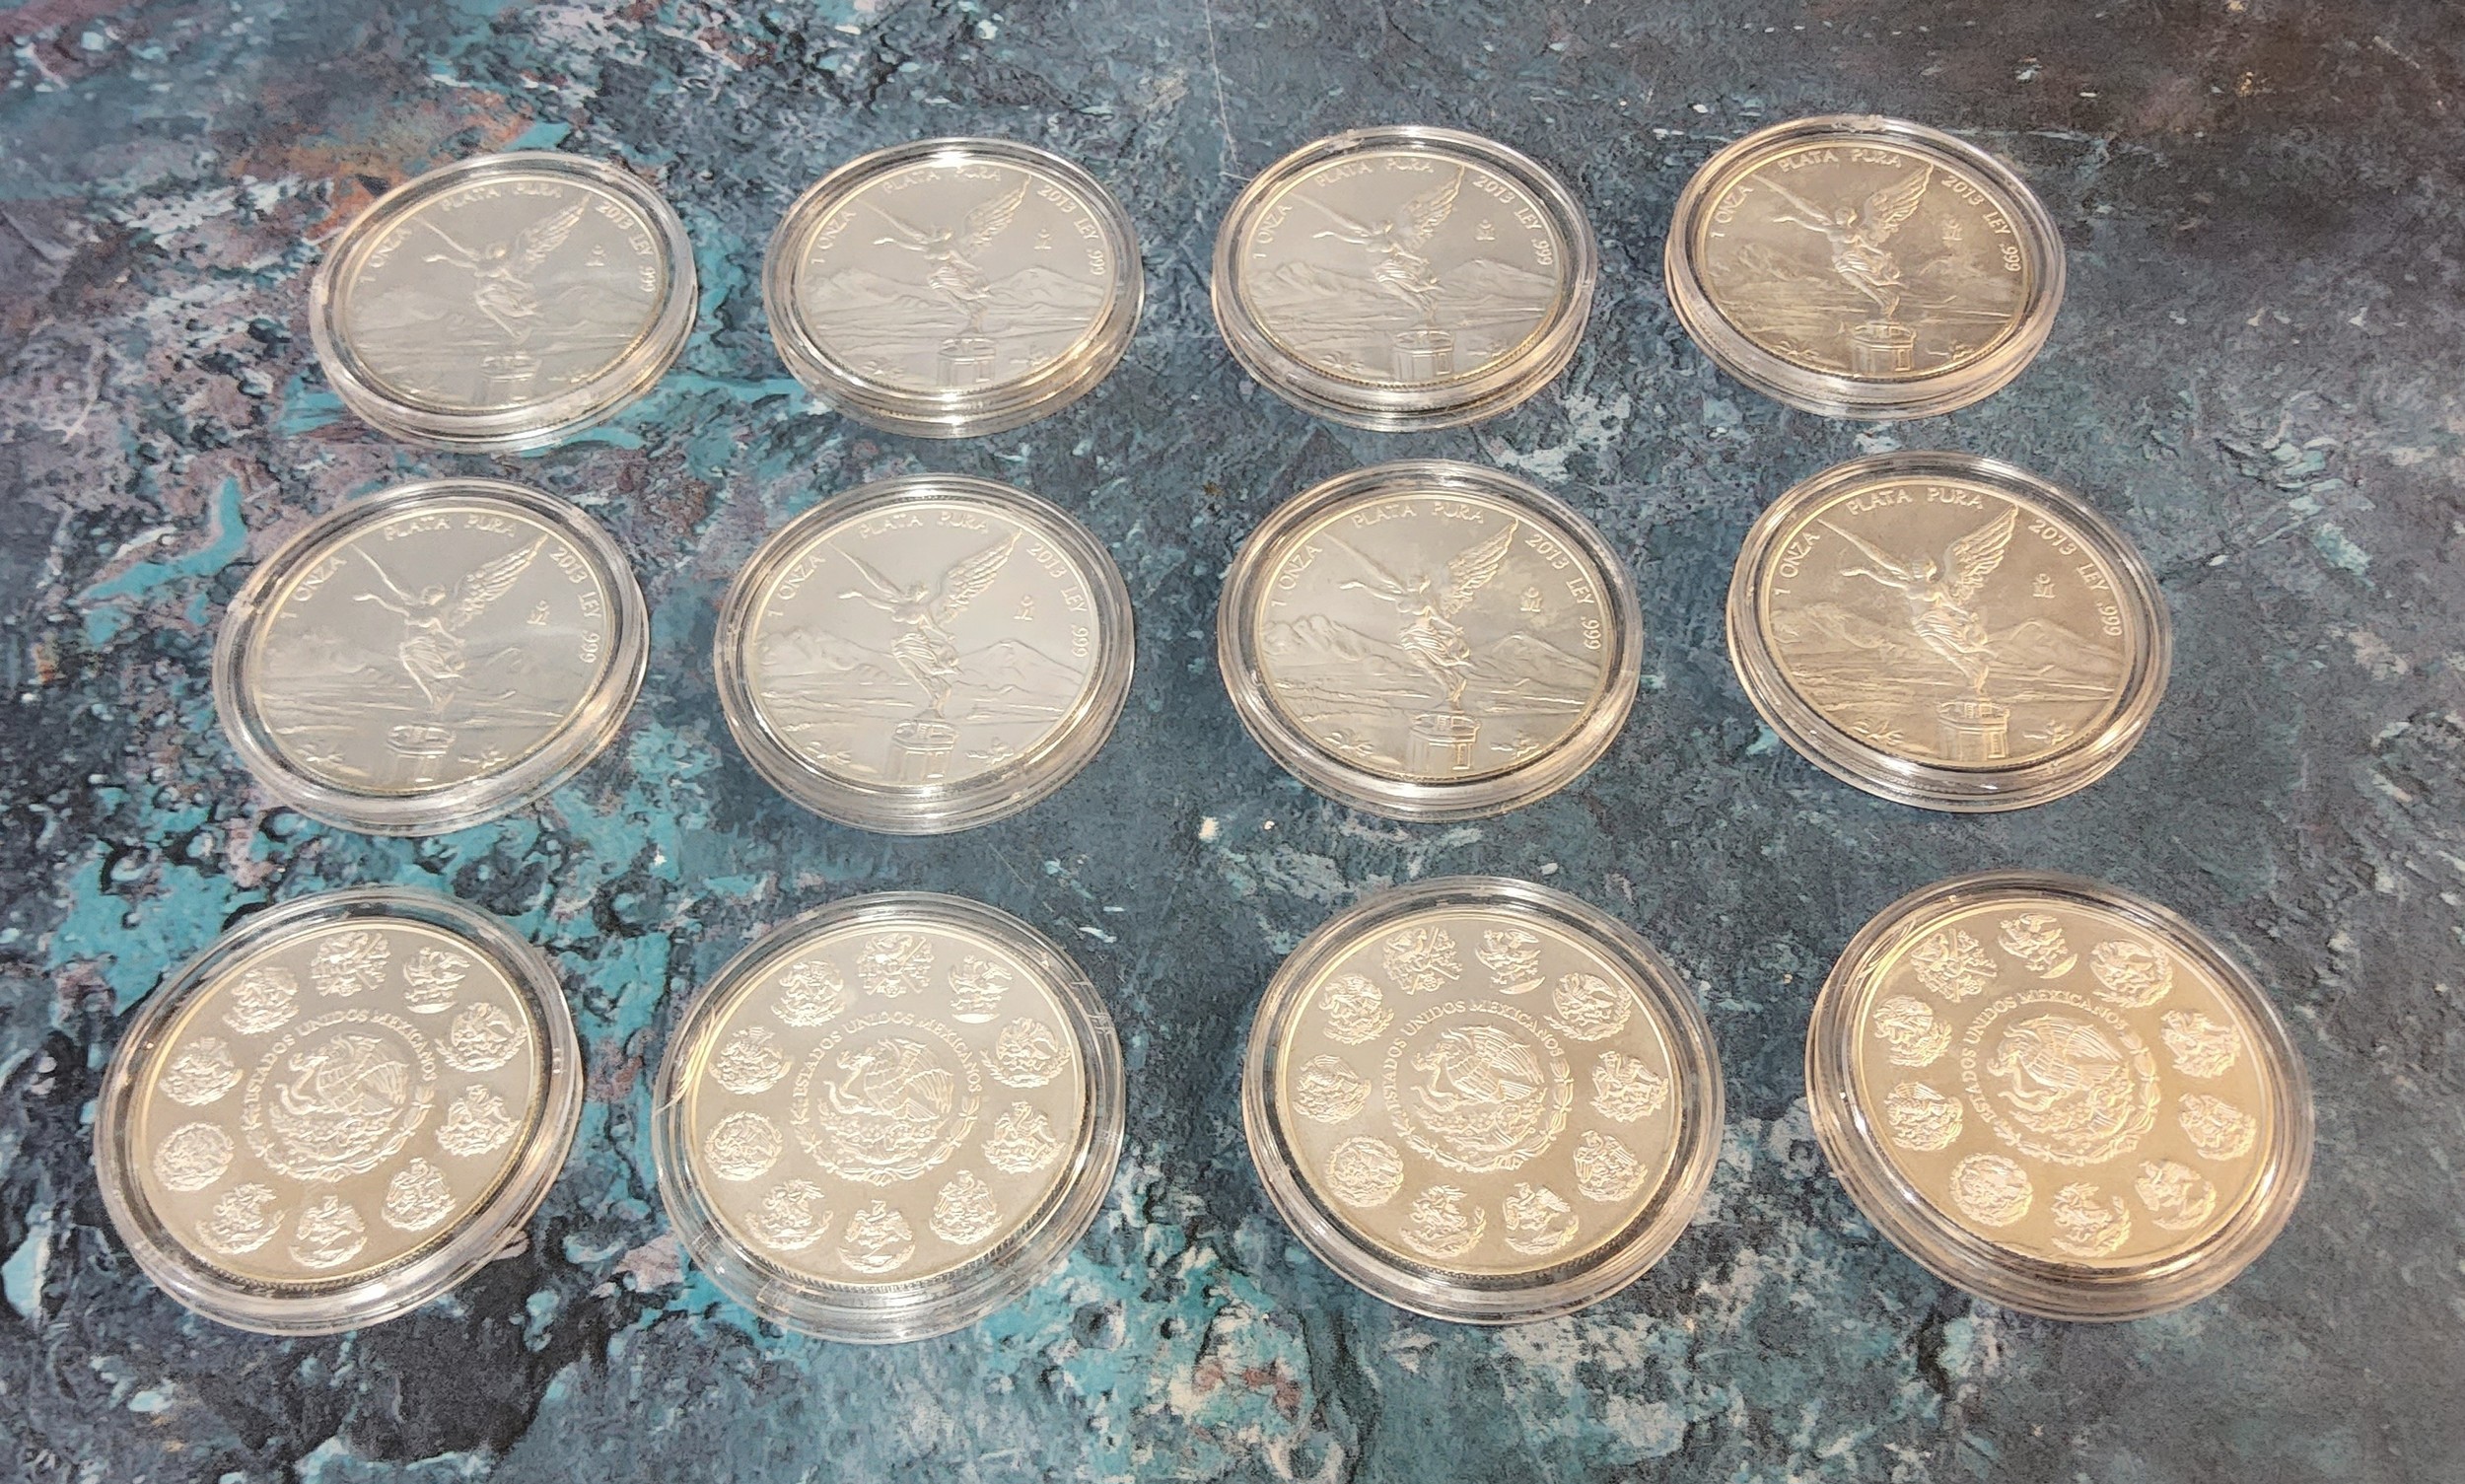 Twelve Mexican Libertad 2013 1oz Fine Silver Coin, all contained in plastic protective cases